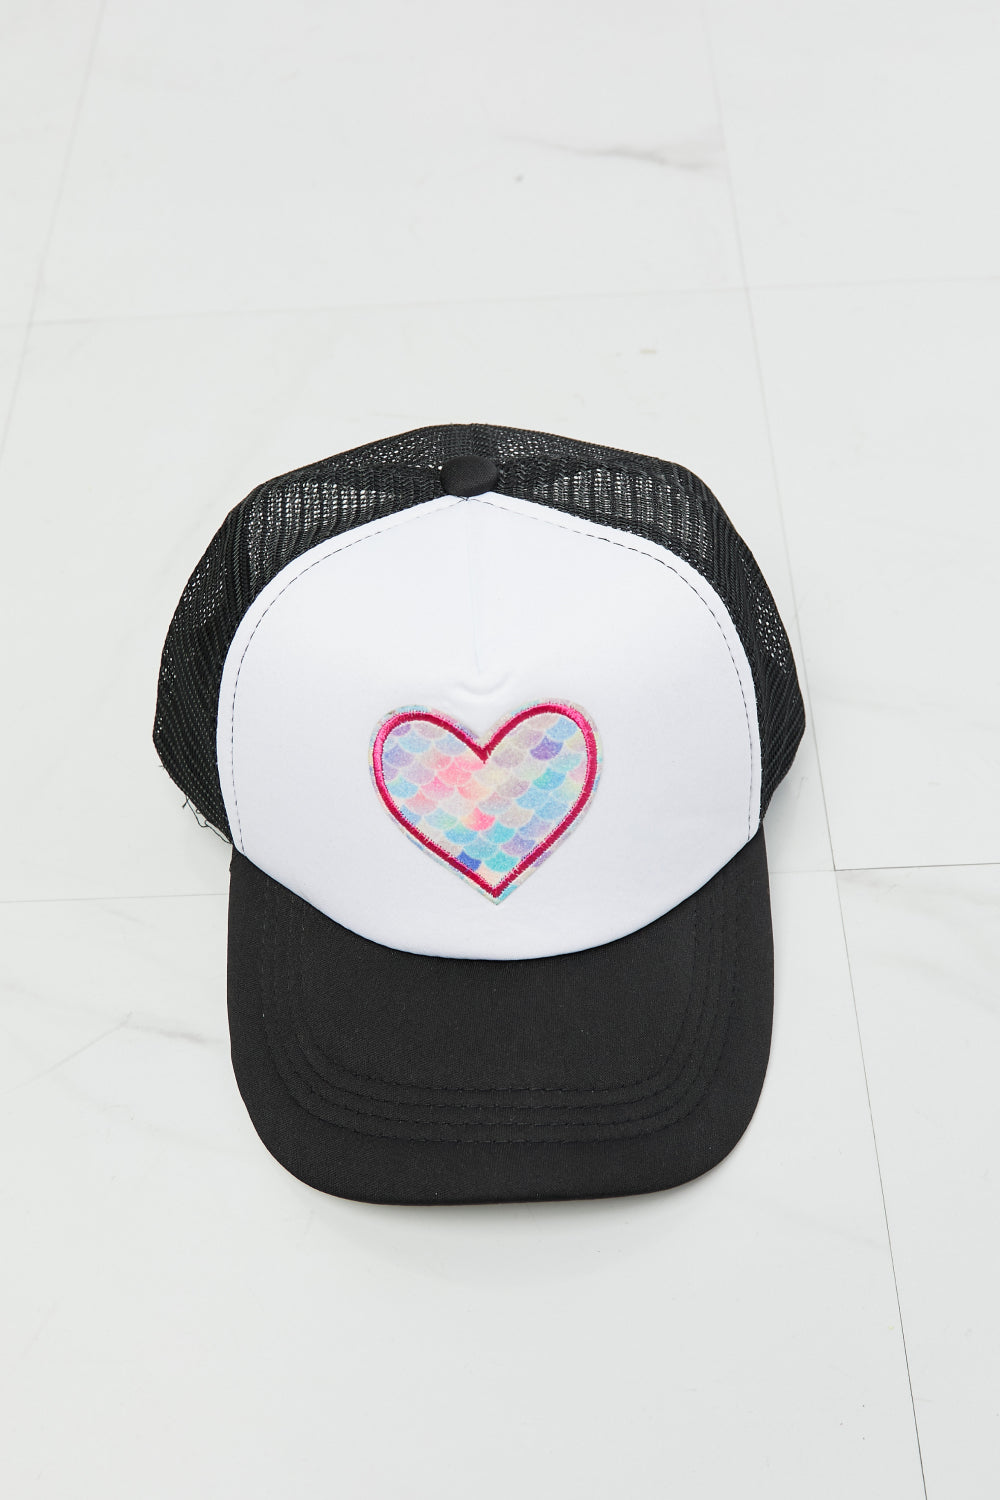 Fame Falling For You Trucker Hat in Black - The Fashion Unicorn